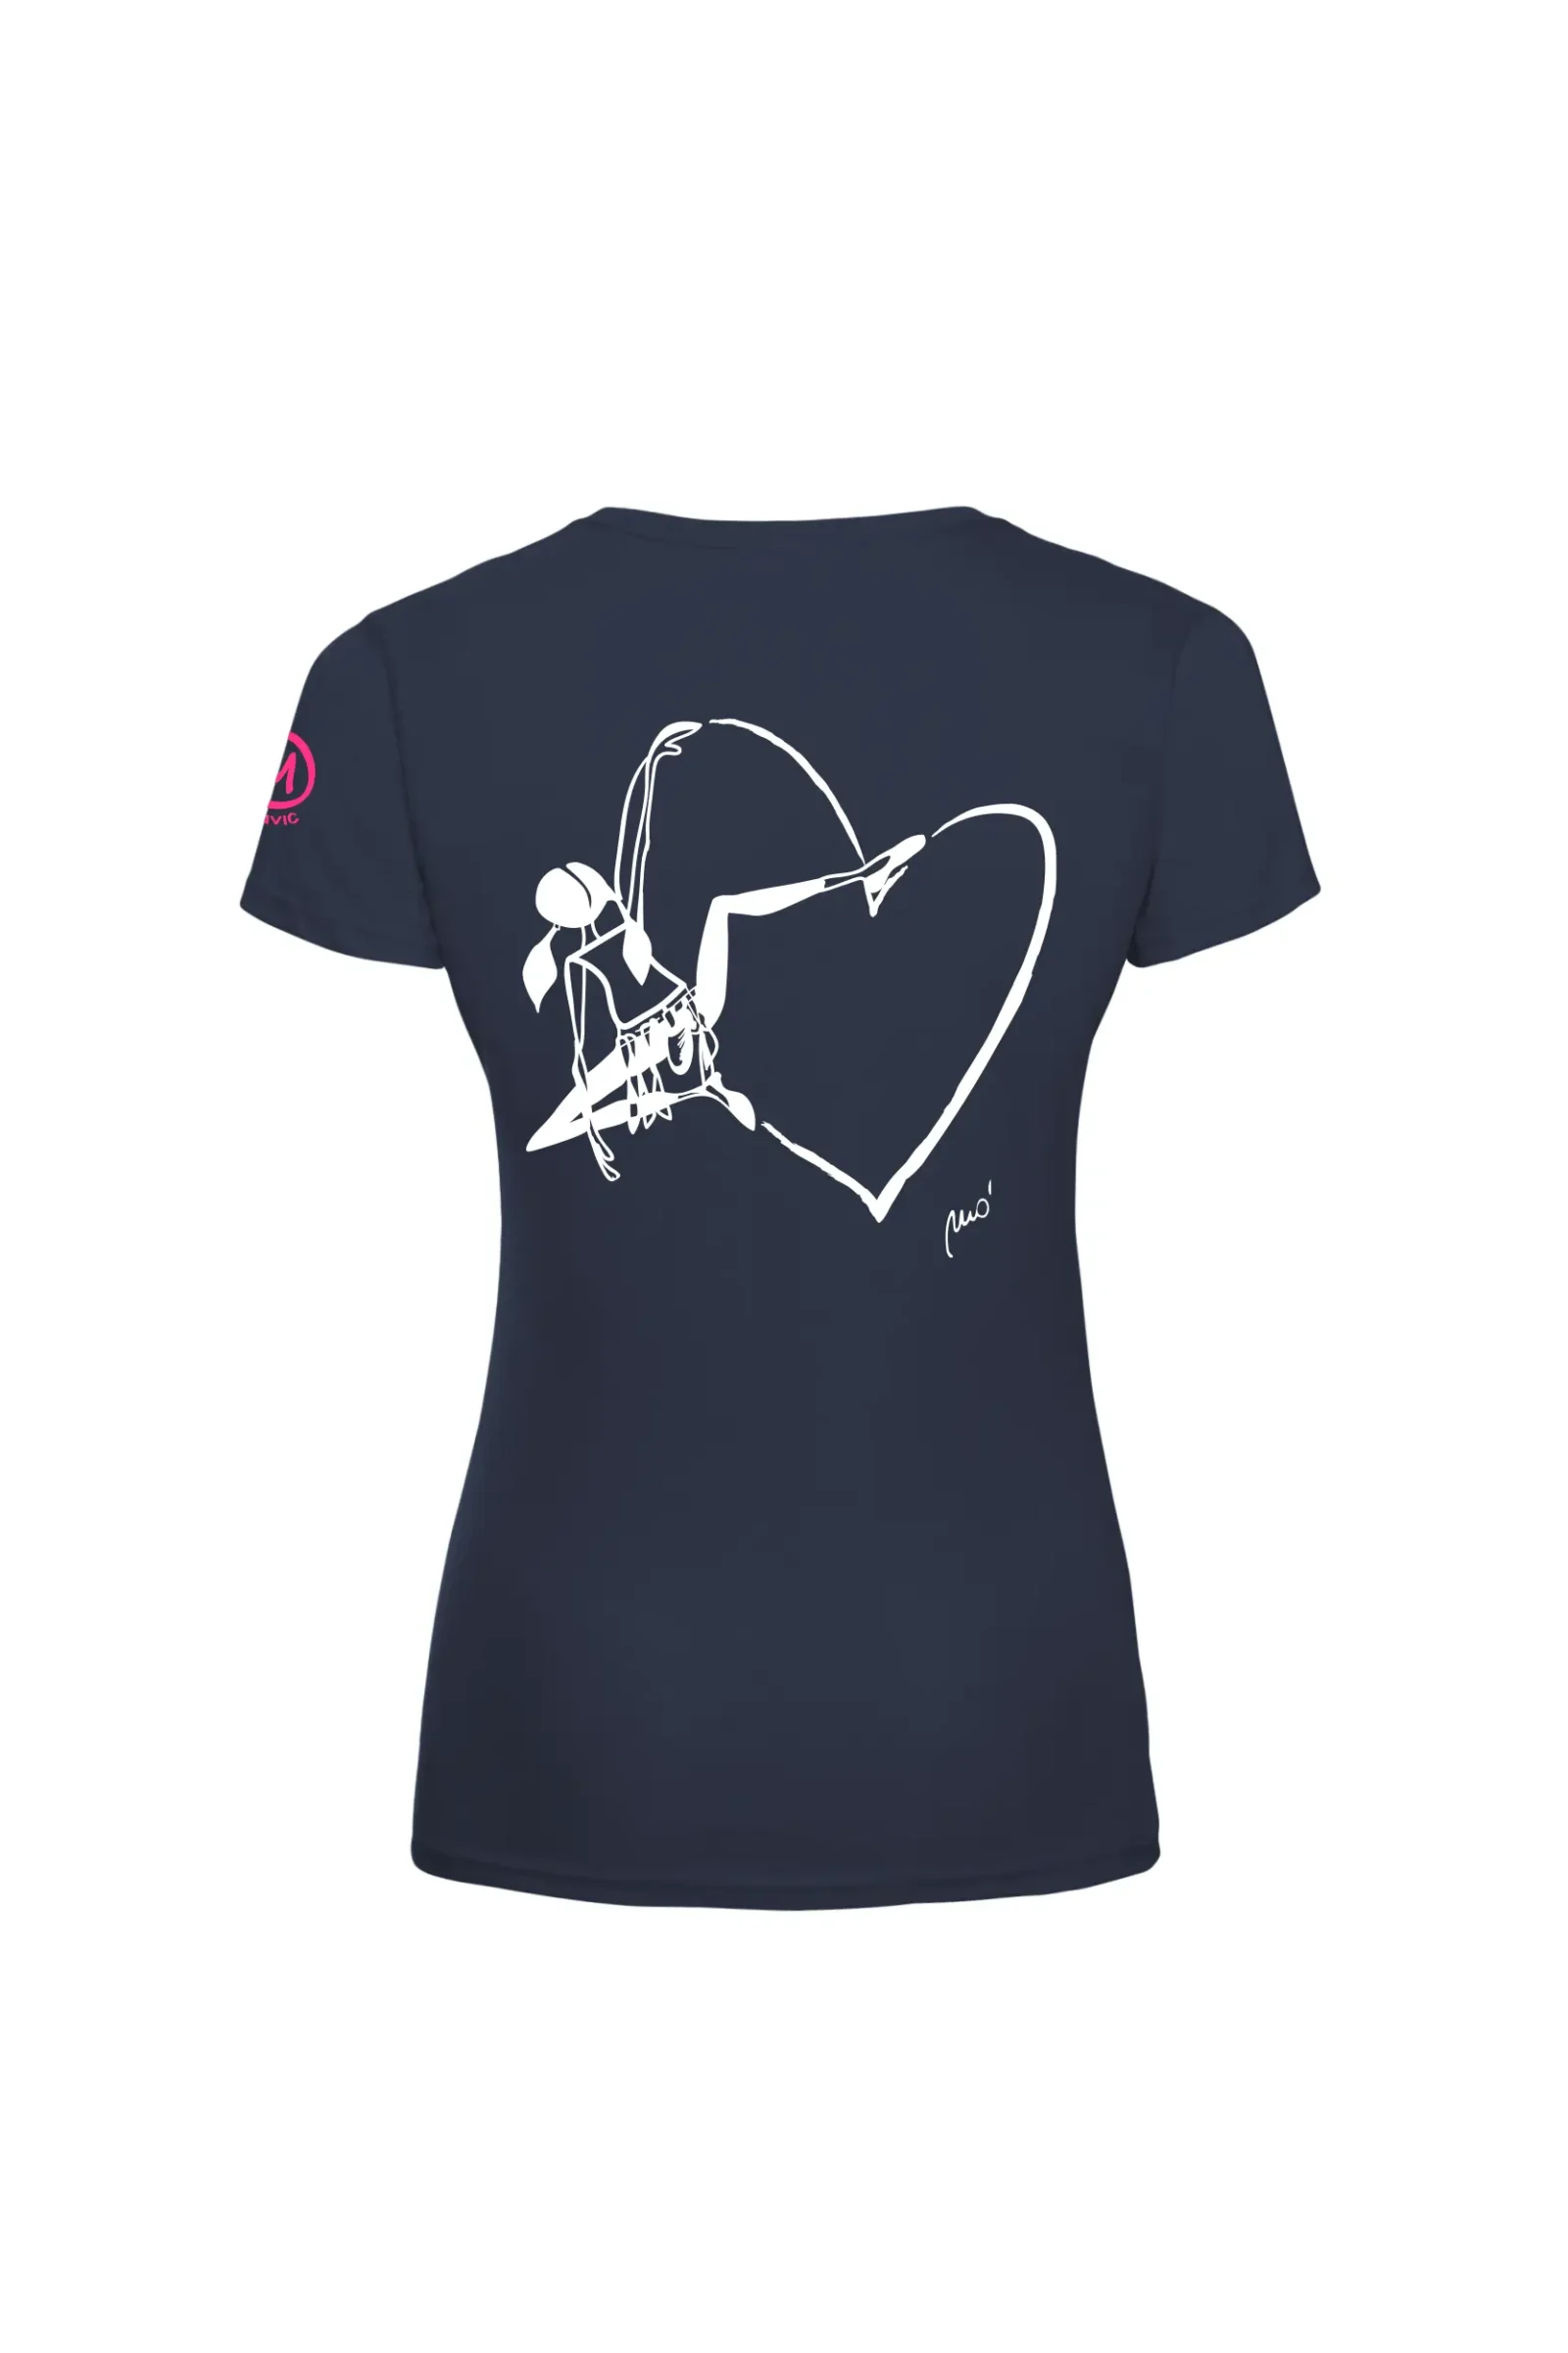 T-shirt arrampicata donna - cotone blu navy - "Out" - SHARON by MONVIC